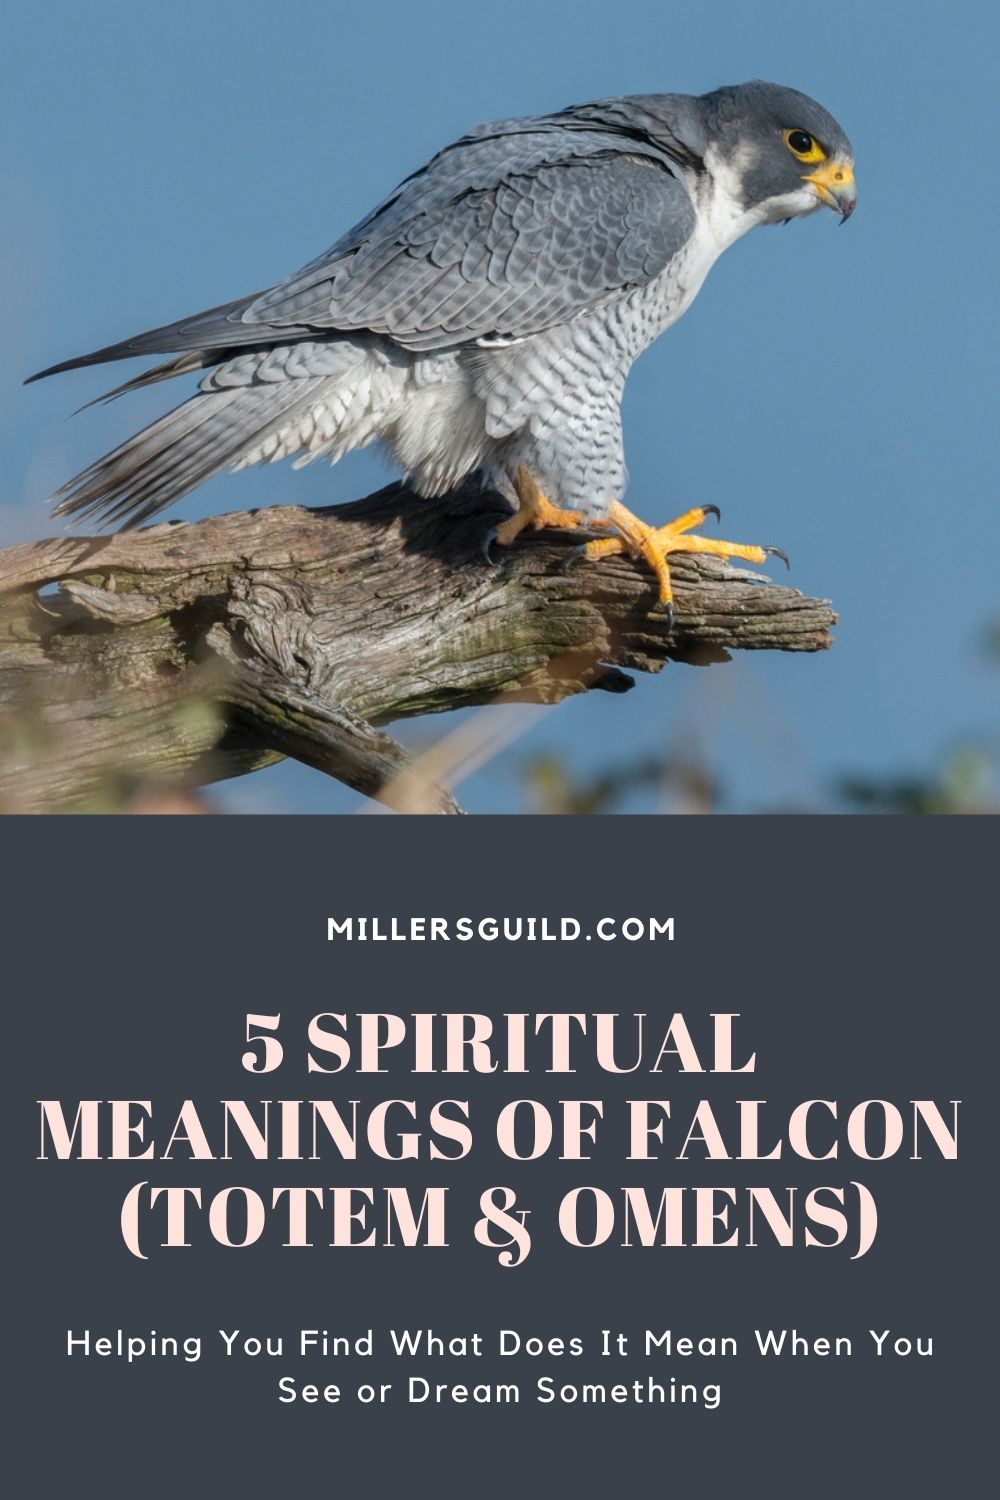 5 Spiritual Meanings of Falcon (Totem & Omens) 1